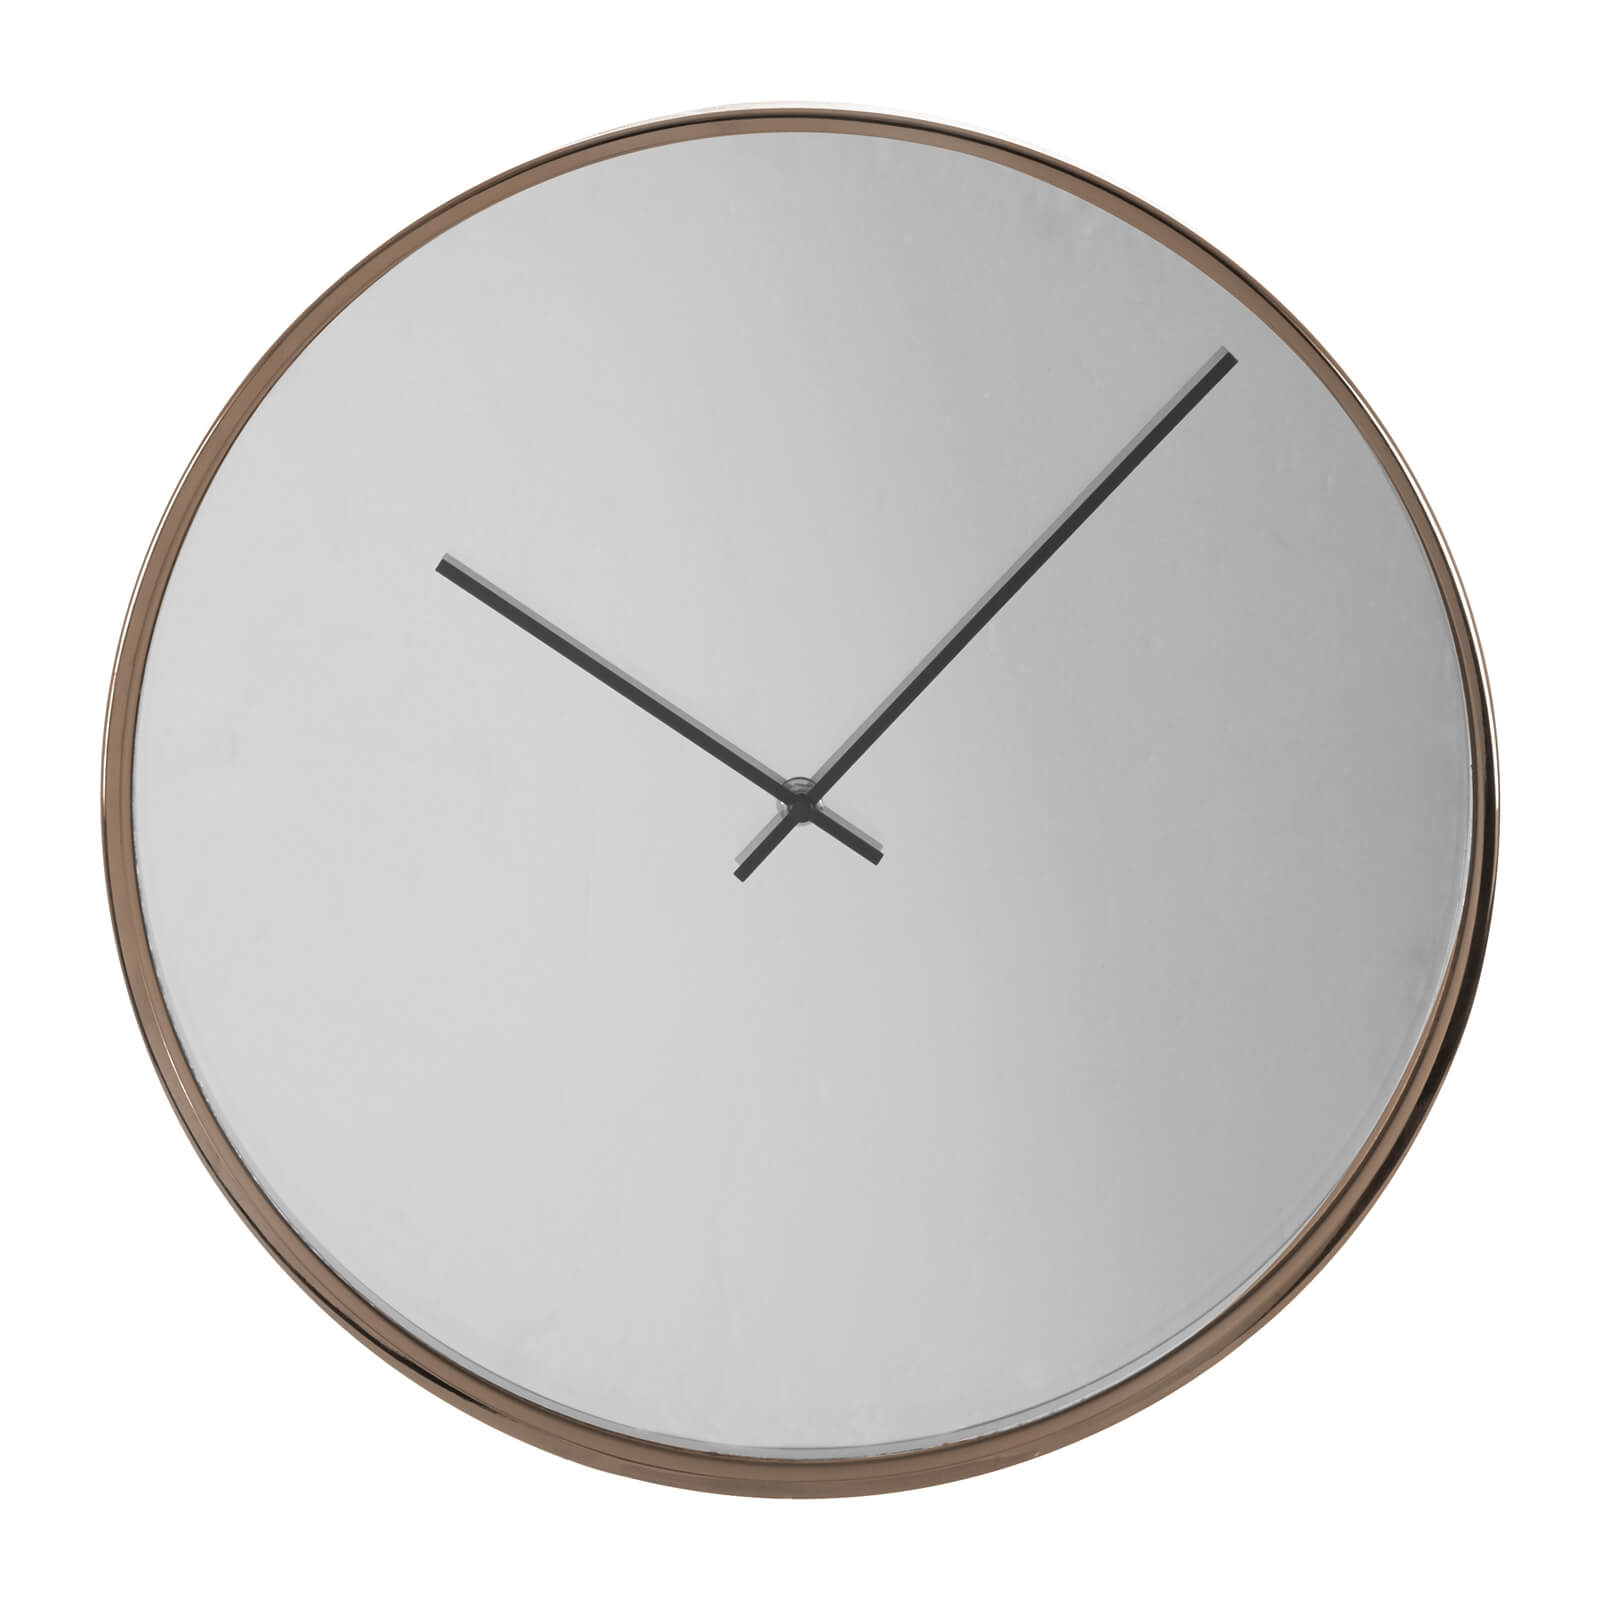 Baillie Wall Clock - Rose Gold & Mirrored